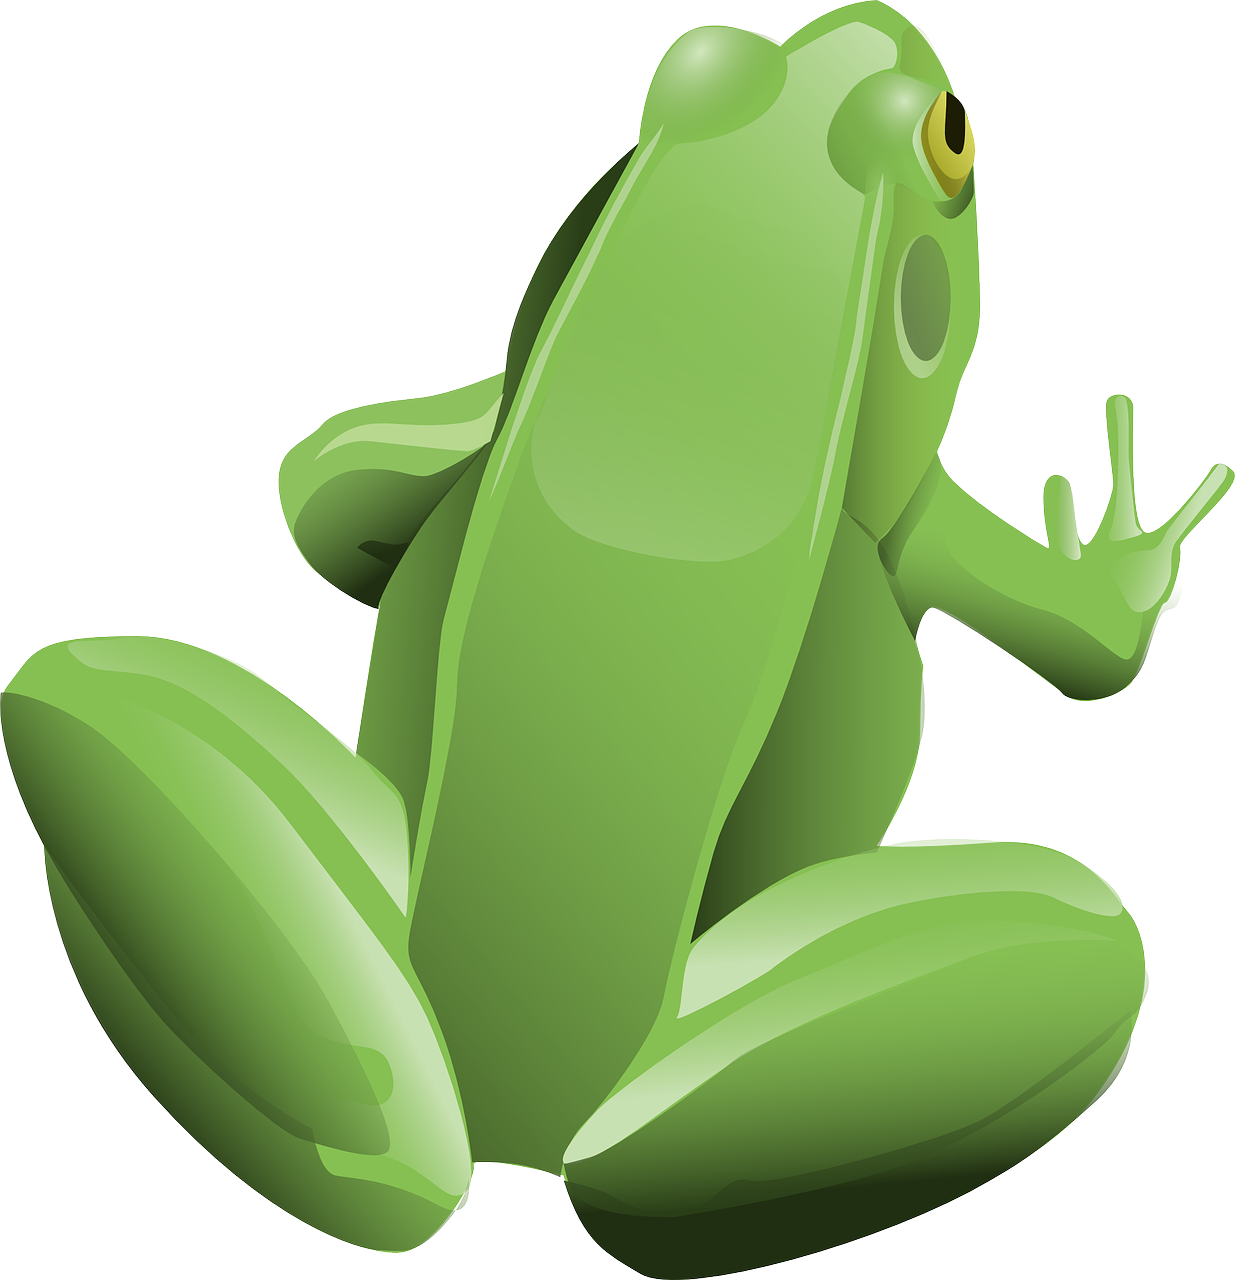 a green frog sitting on a white surface, an illustration of, figuration libre, doing an elegant pose over you, highly no detailed, finger, illustration]